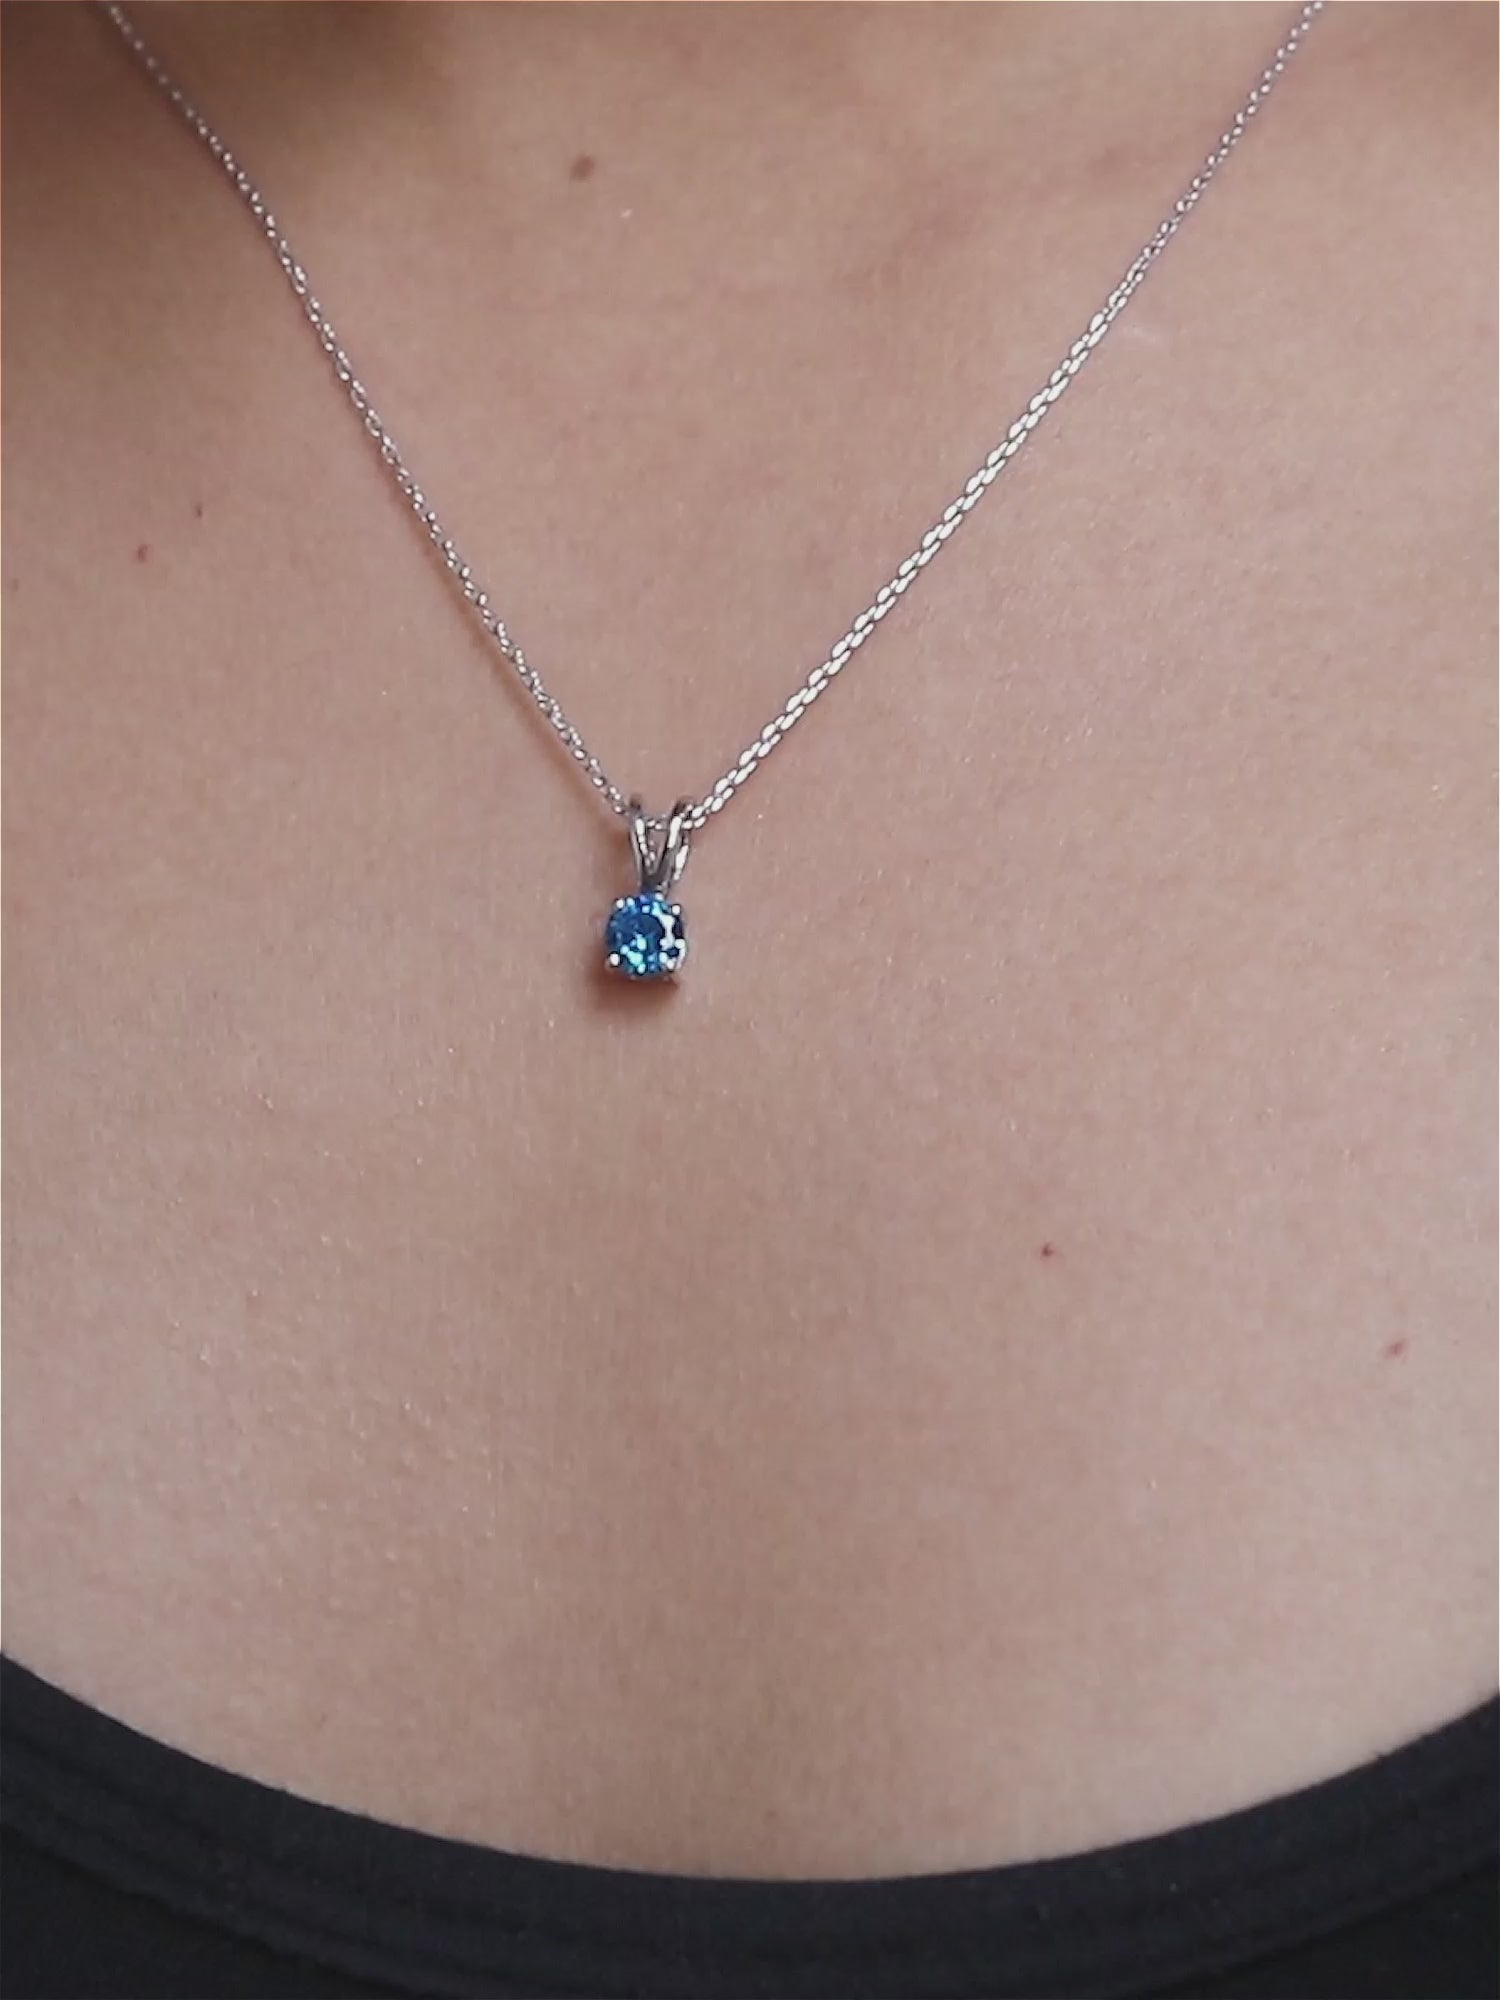 BLUE TOPAZ PURE SILVER PENDANT NECKLACE WITH CHAIN FOR WOMEN-3